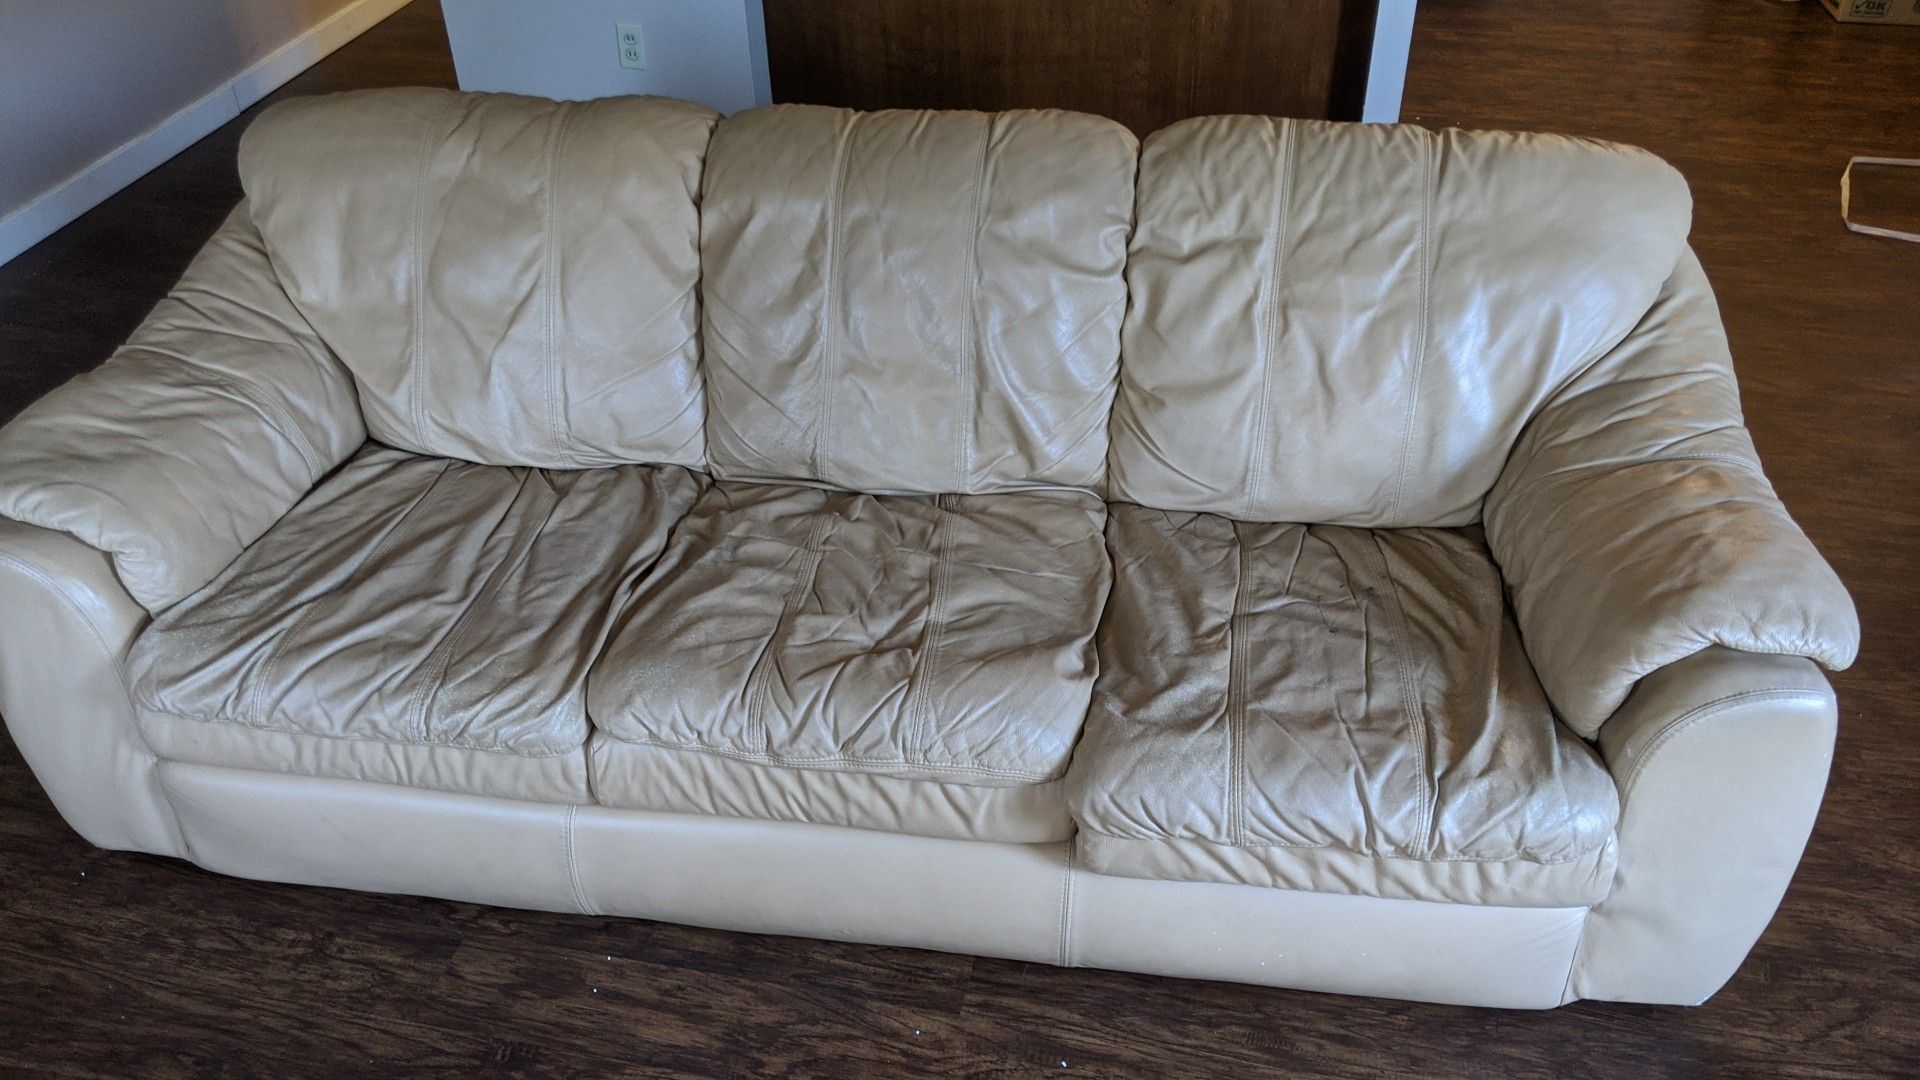 FREE! Super comfy couch